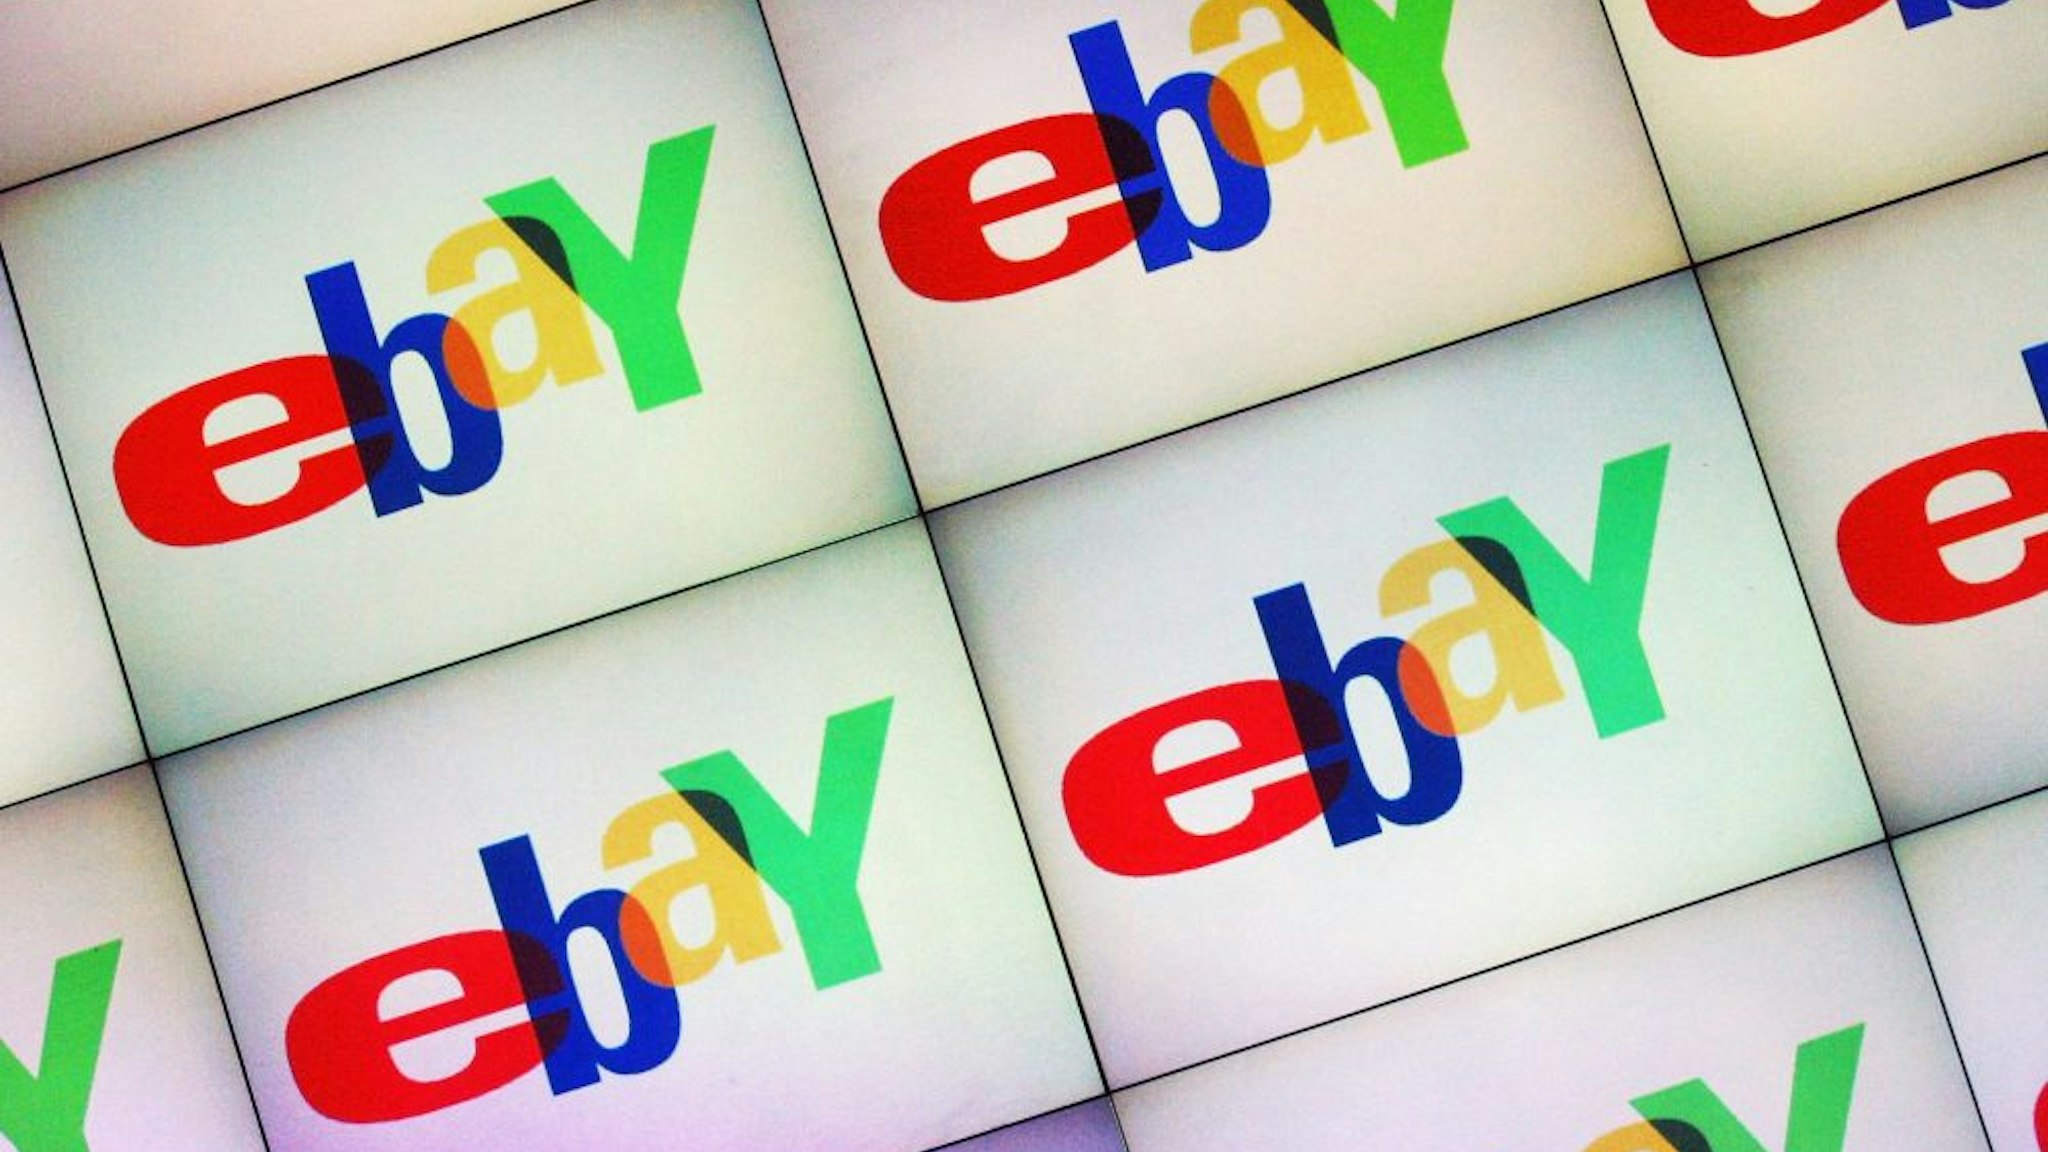 BERLIN, GERMANY - SEPTEMBER 27: A large monitor displays the Ebay logo at an Ebay Live event on September 27, 2003 in Berlin, Germany. Ebay Germany held an Ebay Live event, where several thousand buyers and sellers converge for day long seminars, pep rallies and a night of music and dancing. Germany is Ebay's second biggest market after the US.